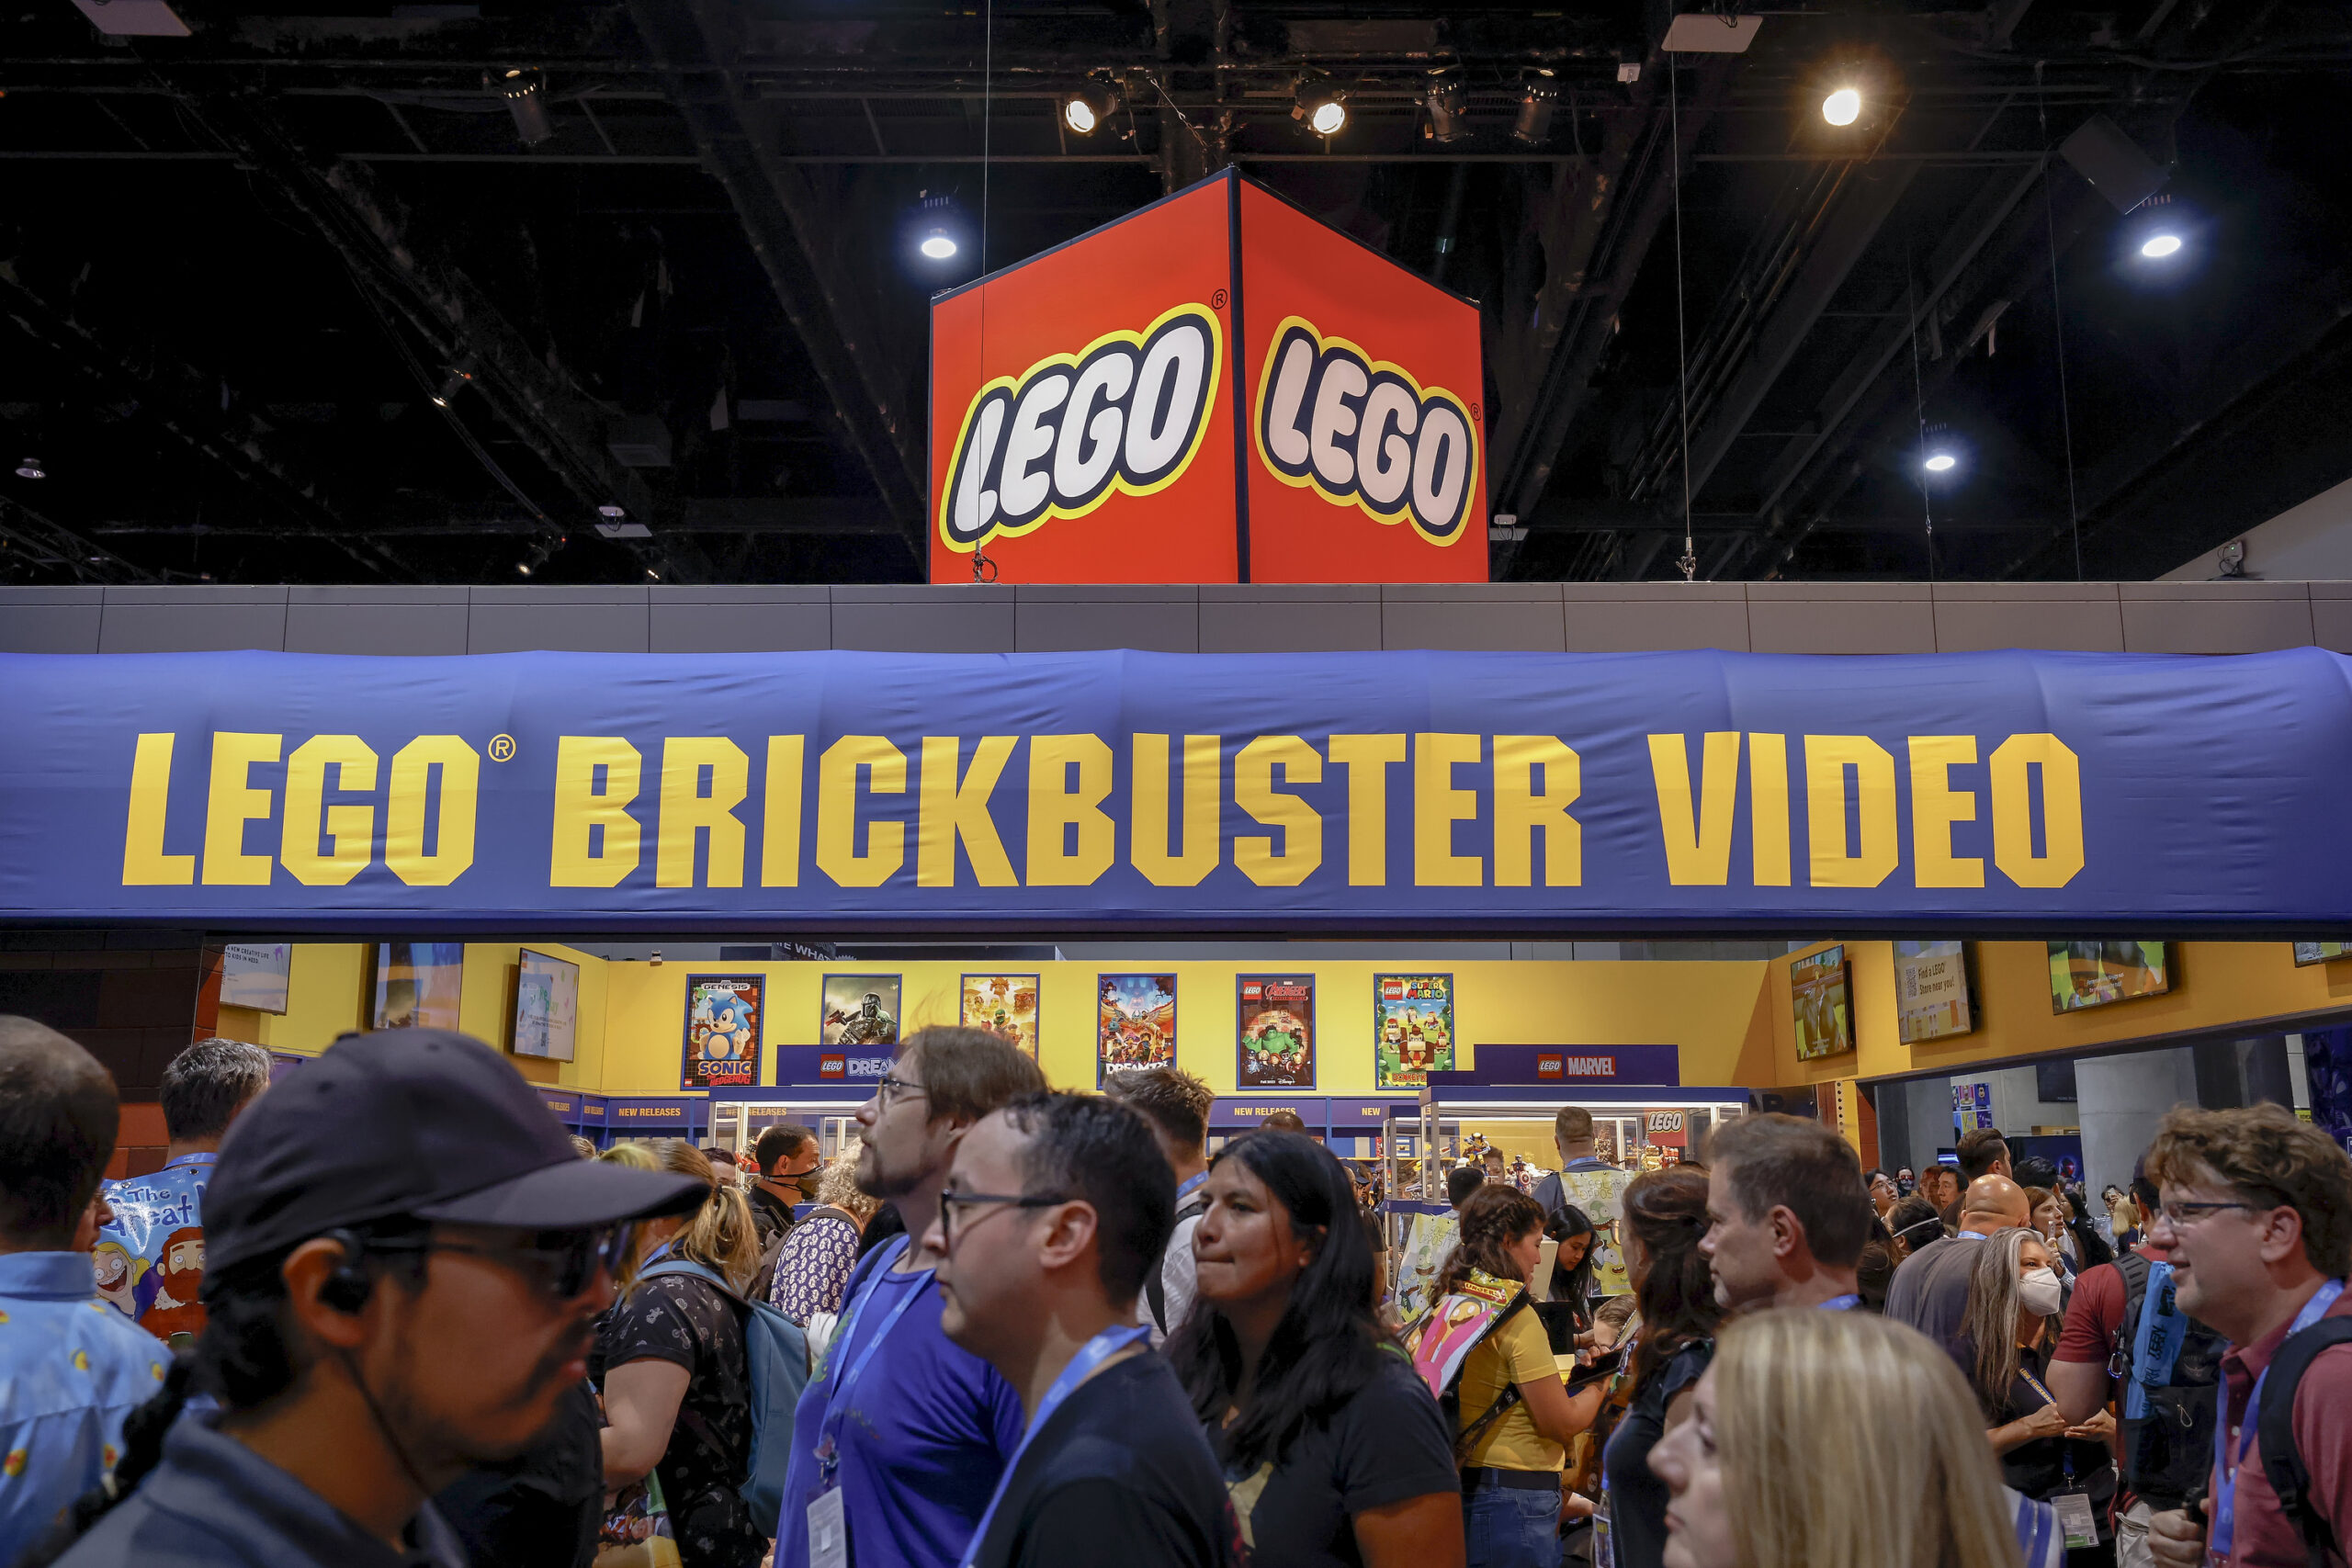 LEGO On All The Fun At Their Brickbuster Booth At Comic-Con | SDCC 2023 Interview